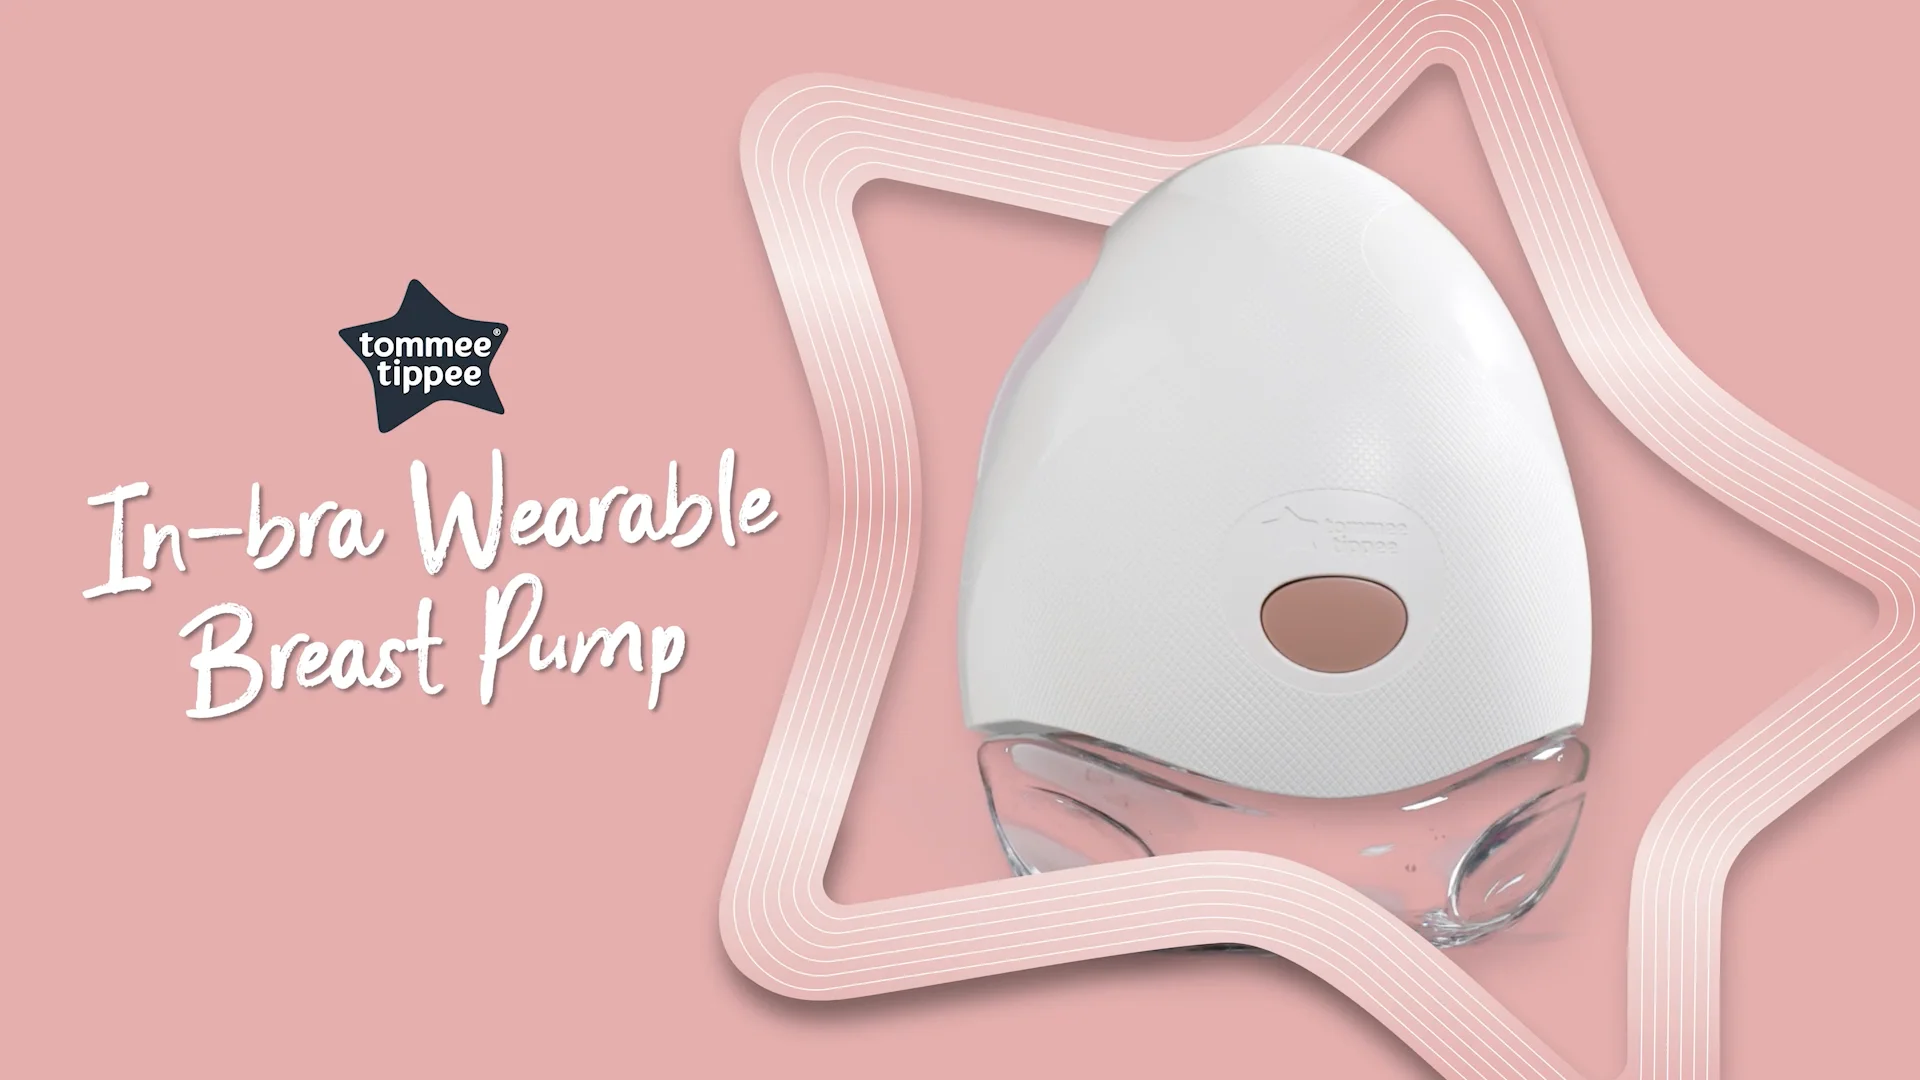 In-Bra Wearable Breast Pump: How to Clean (US) on Vimeo